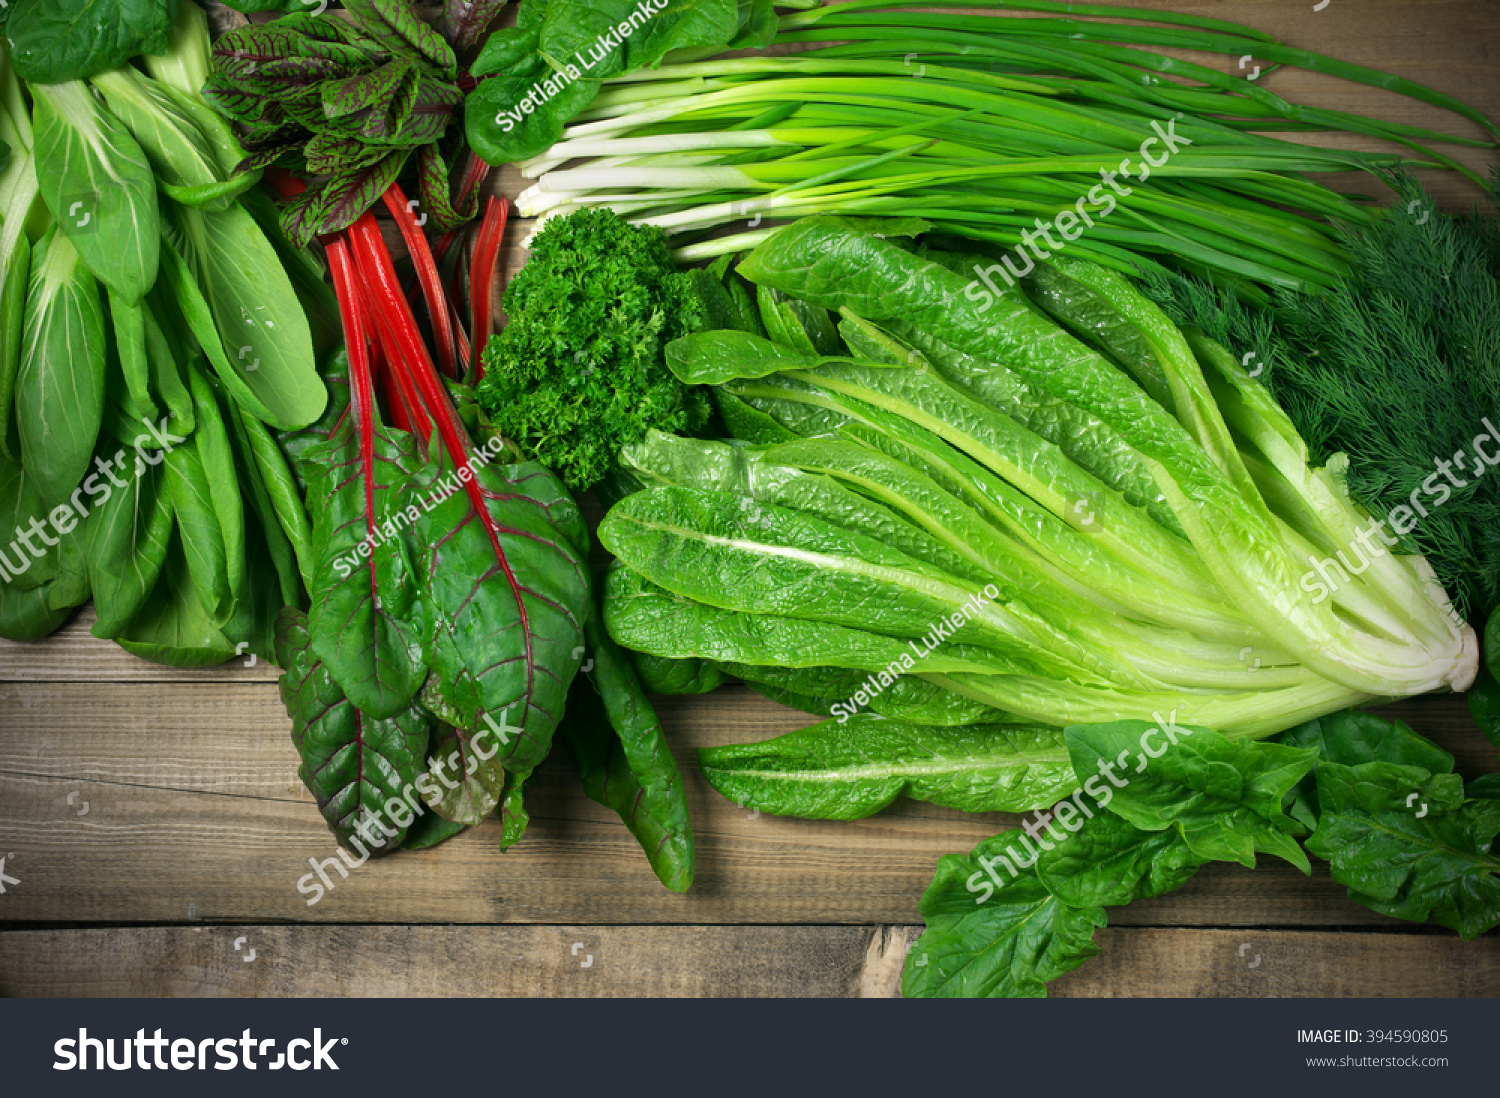 Spring vitamin set of various green leafy vegetables on rustic wooden table. Top view point. #394590805